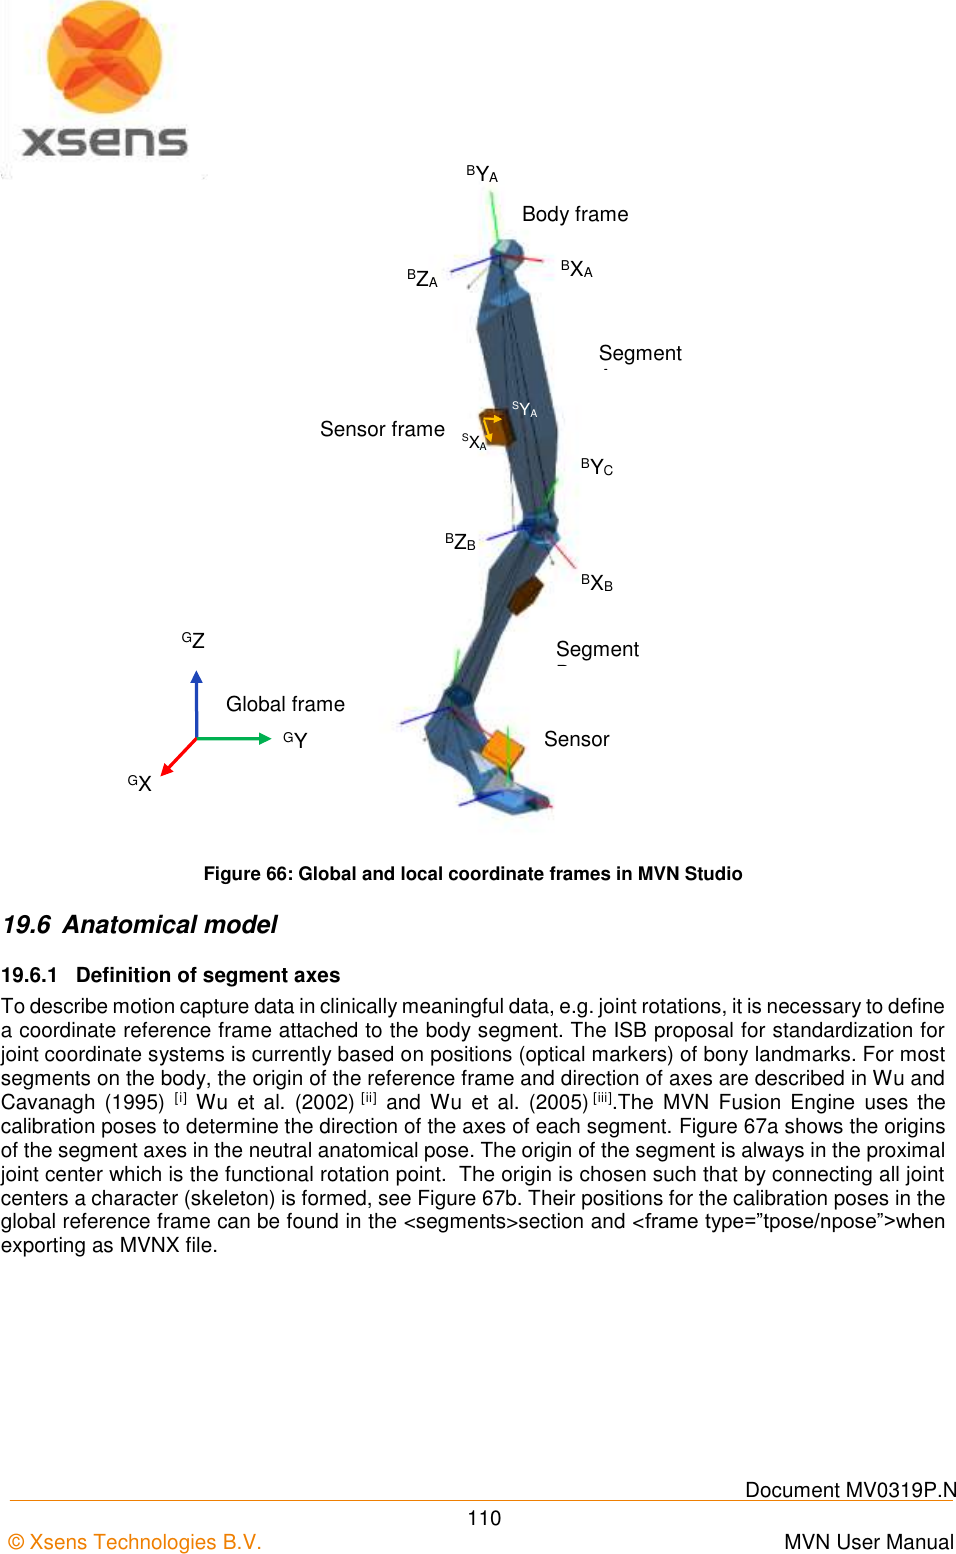    Document MV0319P.N © Xsens Technologies B.V.      MVN User Manual  110  Figure 66: Global and local coordinate frames in MVN Studio 19.6  Anatomical model 19.6.1  Definition of segment axes To describe motion capture data in clinically meaningful data, e.g. joint rotations, it is necessary to define a coordinate reference frame attached to the body segment. The ISB proposal for standardization for joint coordinate systems is currently based on positions (optical markers) of bony landmarks. For most segments on the body, the origin of the reference frame and direction of axes are described in Wu and Cavanagh  (1995)  [i]  Wu  et  al.  (2002) [ii]  and  Wu  et  al.  (2005) [iii].The  MVN  Fusion  Engine  uses the calibration poses to determine the direction of the axes of each segment. Figure 67a shows the origins of the segment axes in the neutral anatomical pose. The origin of the segment is always in the proximal joint center which is the functional rotation point.  The origin is chosen such that by connecting all joint centers a character (skeleton) is formed, see Figure 67b. Their positions for the calibration poses in the global reference frame can be found in the &lt;segments&gt;section and &lt;frame type=”tpose/npose”&gt;when exporting as MVNX file. Segment A Segment B Sensor BYA BXA BZA BXB BYC BZB SXA SYA Body frame Sensor frame GZ GX GY Global frame 